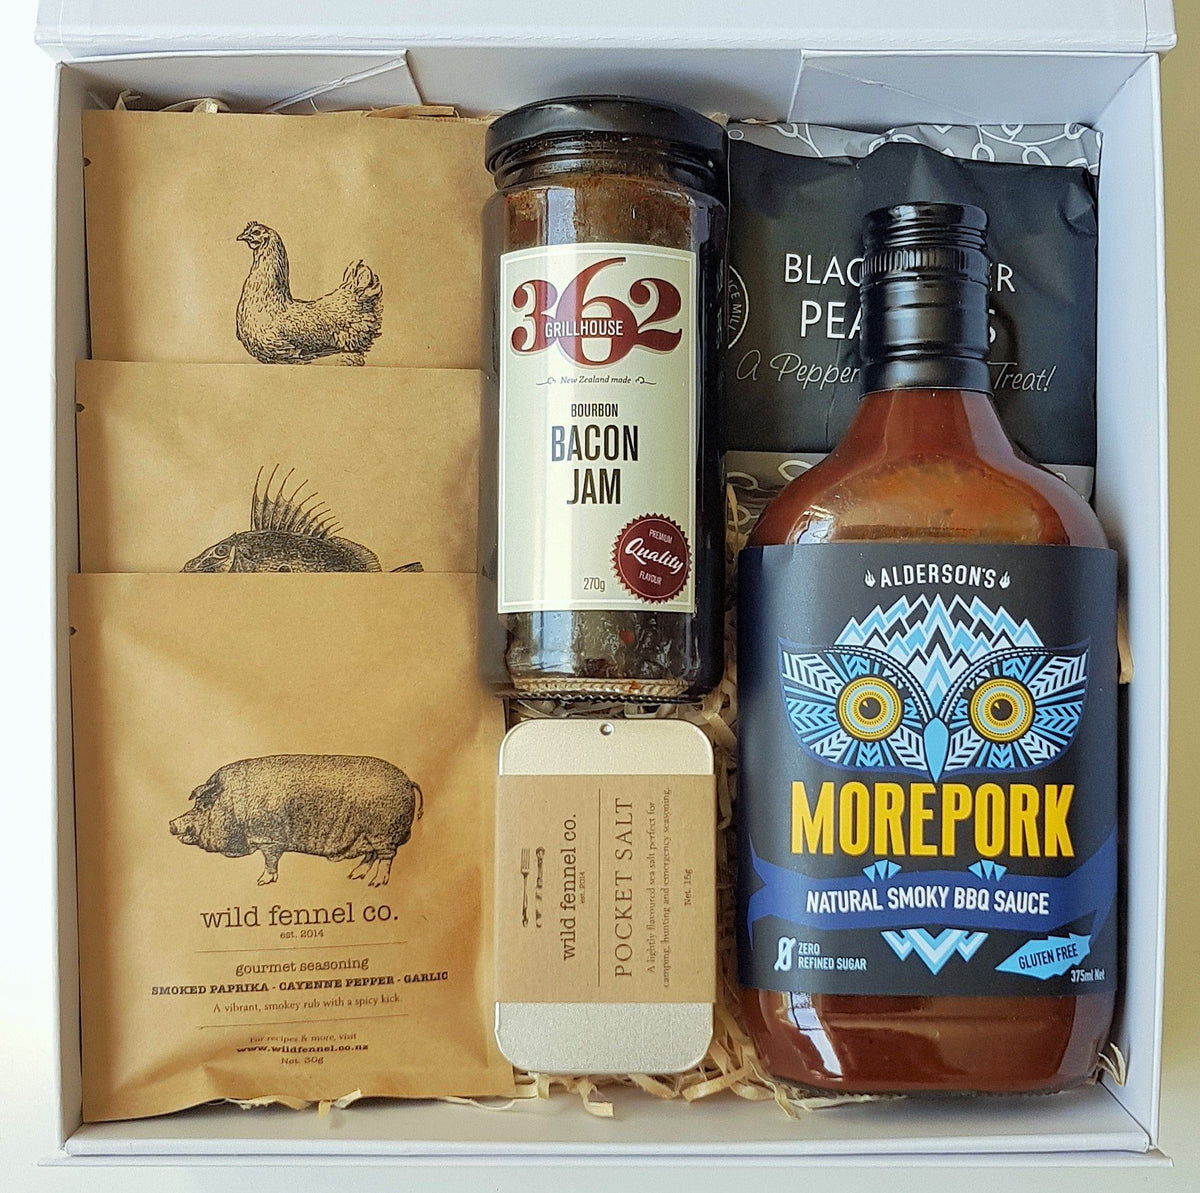 Boxsmith Food Gift Box featuring wild fennel seasonings, aldersons morepork sauce, wild fennel pocket salt, 362 wild south bourbon bacon jam & herb and spice black pepper peanuts. Easy NZ wide delivery of our online NZ food gifts